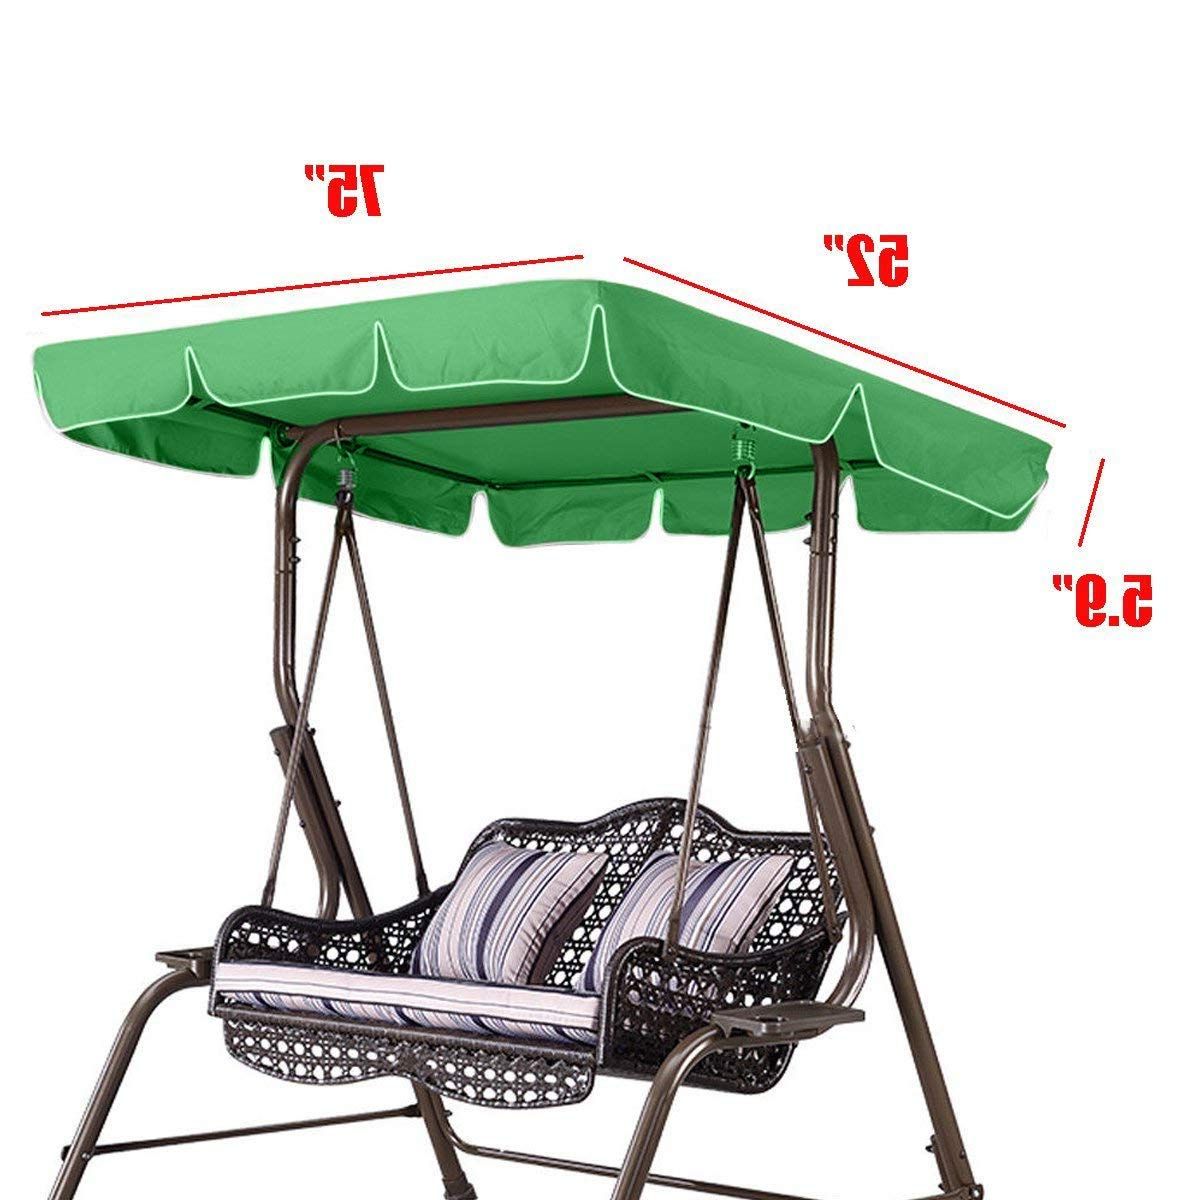 Cheap Canopy For Porch Swing, Find Canopy For Porch Swing For Newest 2 Person Adjustable Tilt Canopy Patio Loveseat Porch Swings (View 23 of 30)